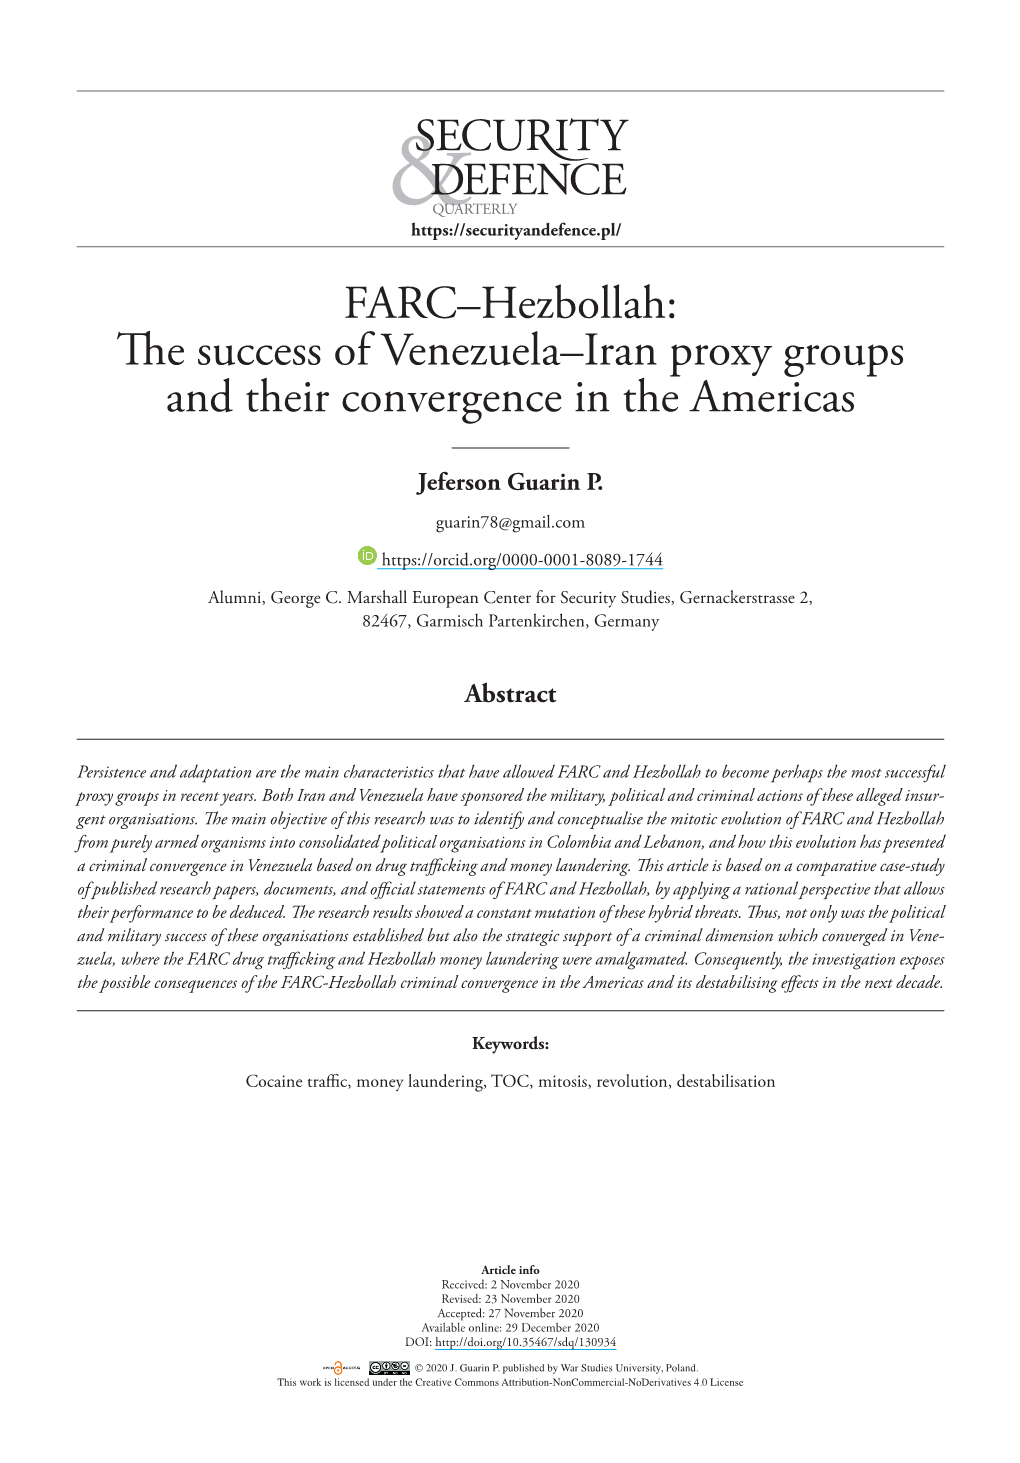 FARC–Hezbollah: the Success of Venezuela–Iran Proxy Groups and Their Convergence in the Americas